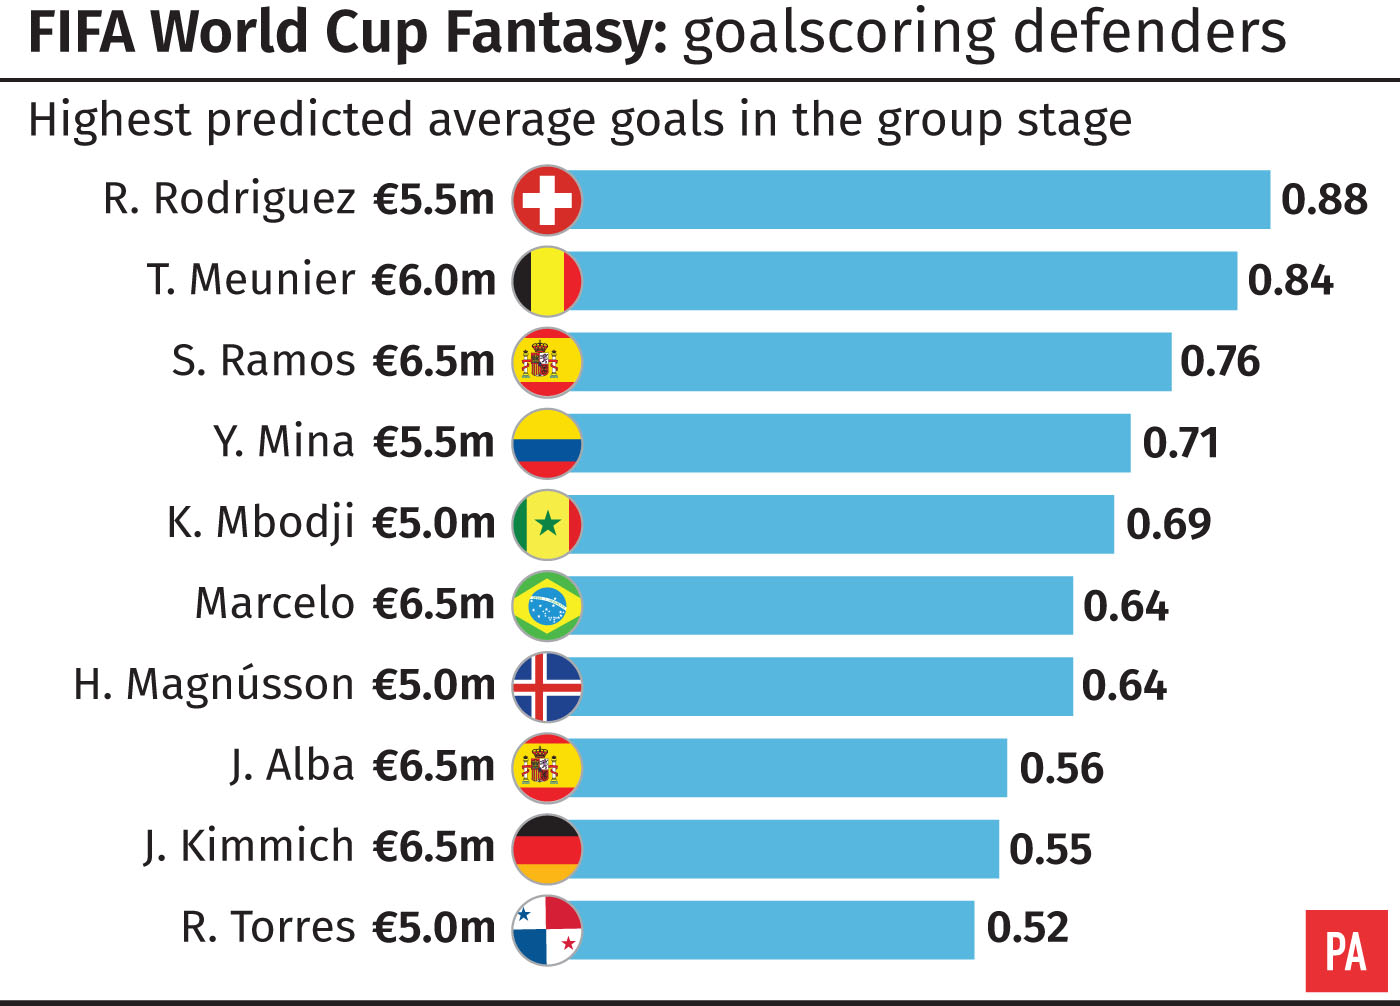 The predicted highest-scoring defenders at the group stage of the 2018 World Cup